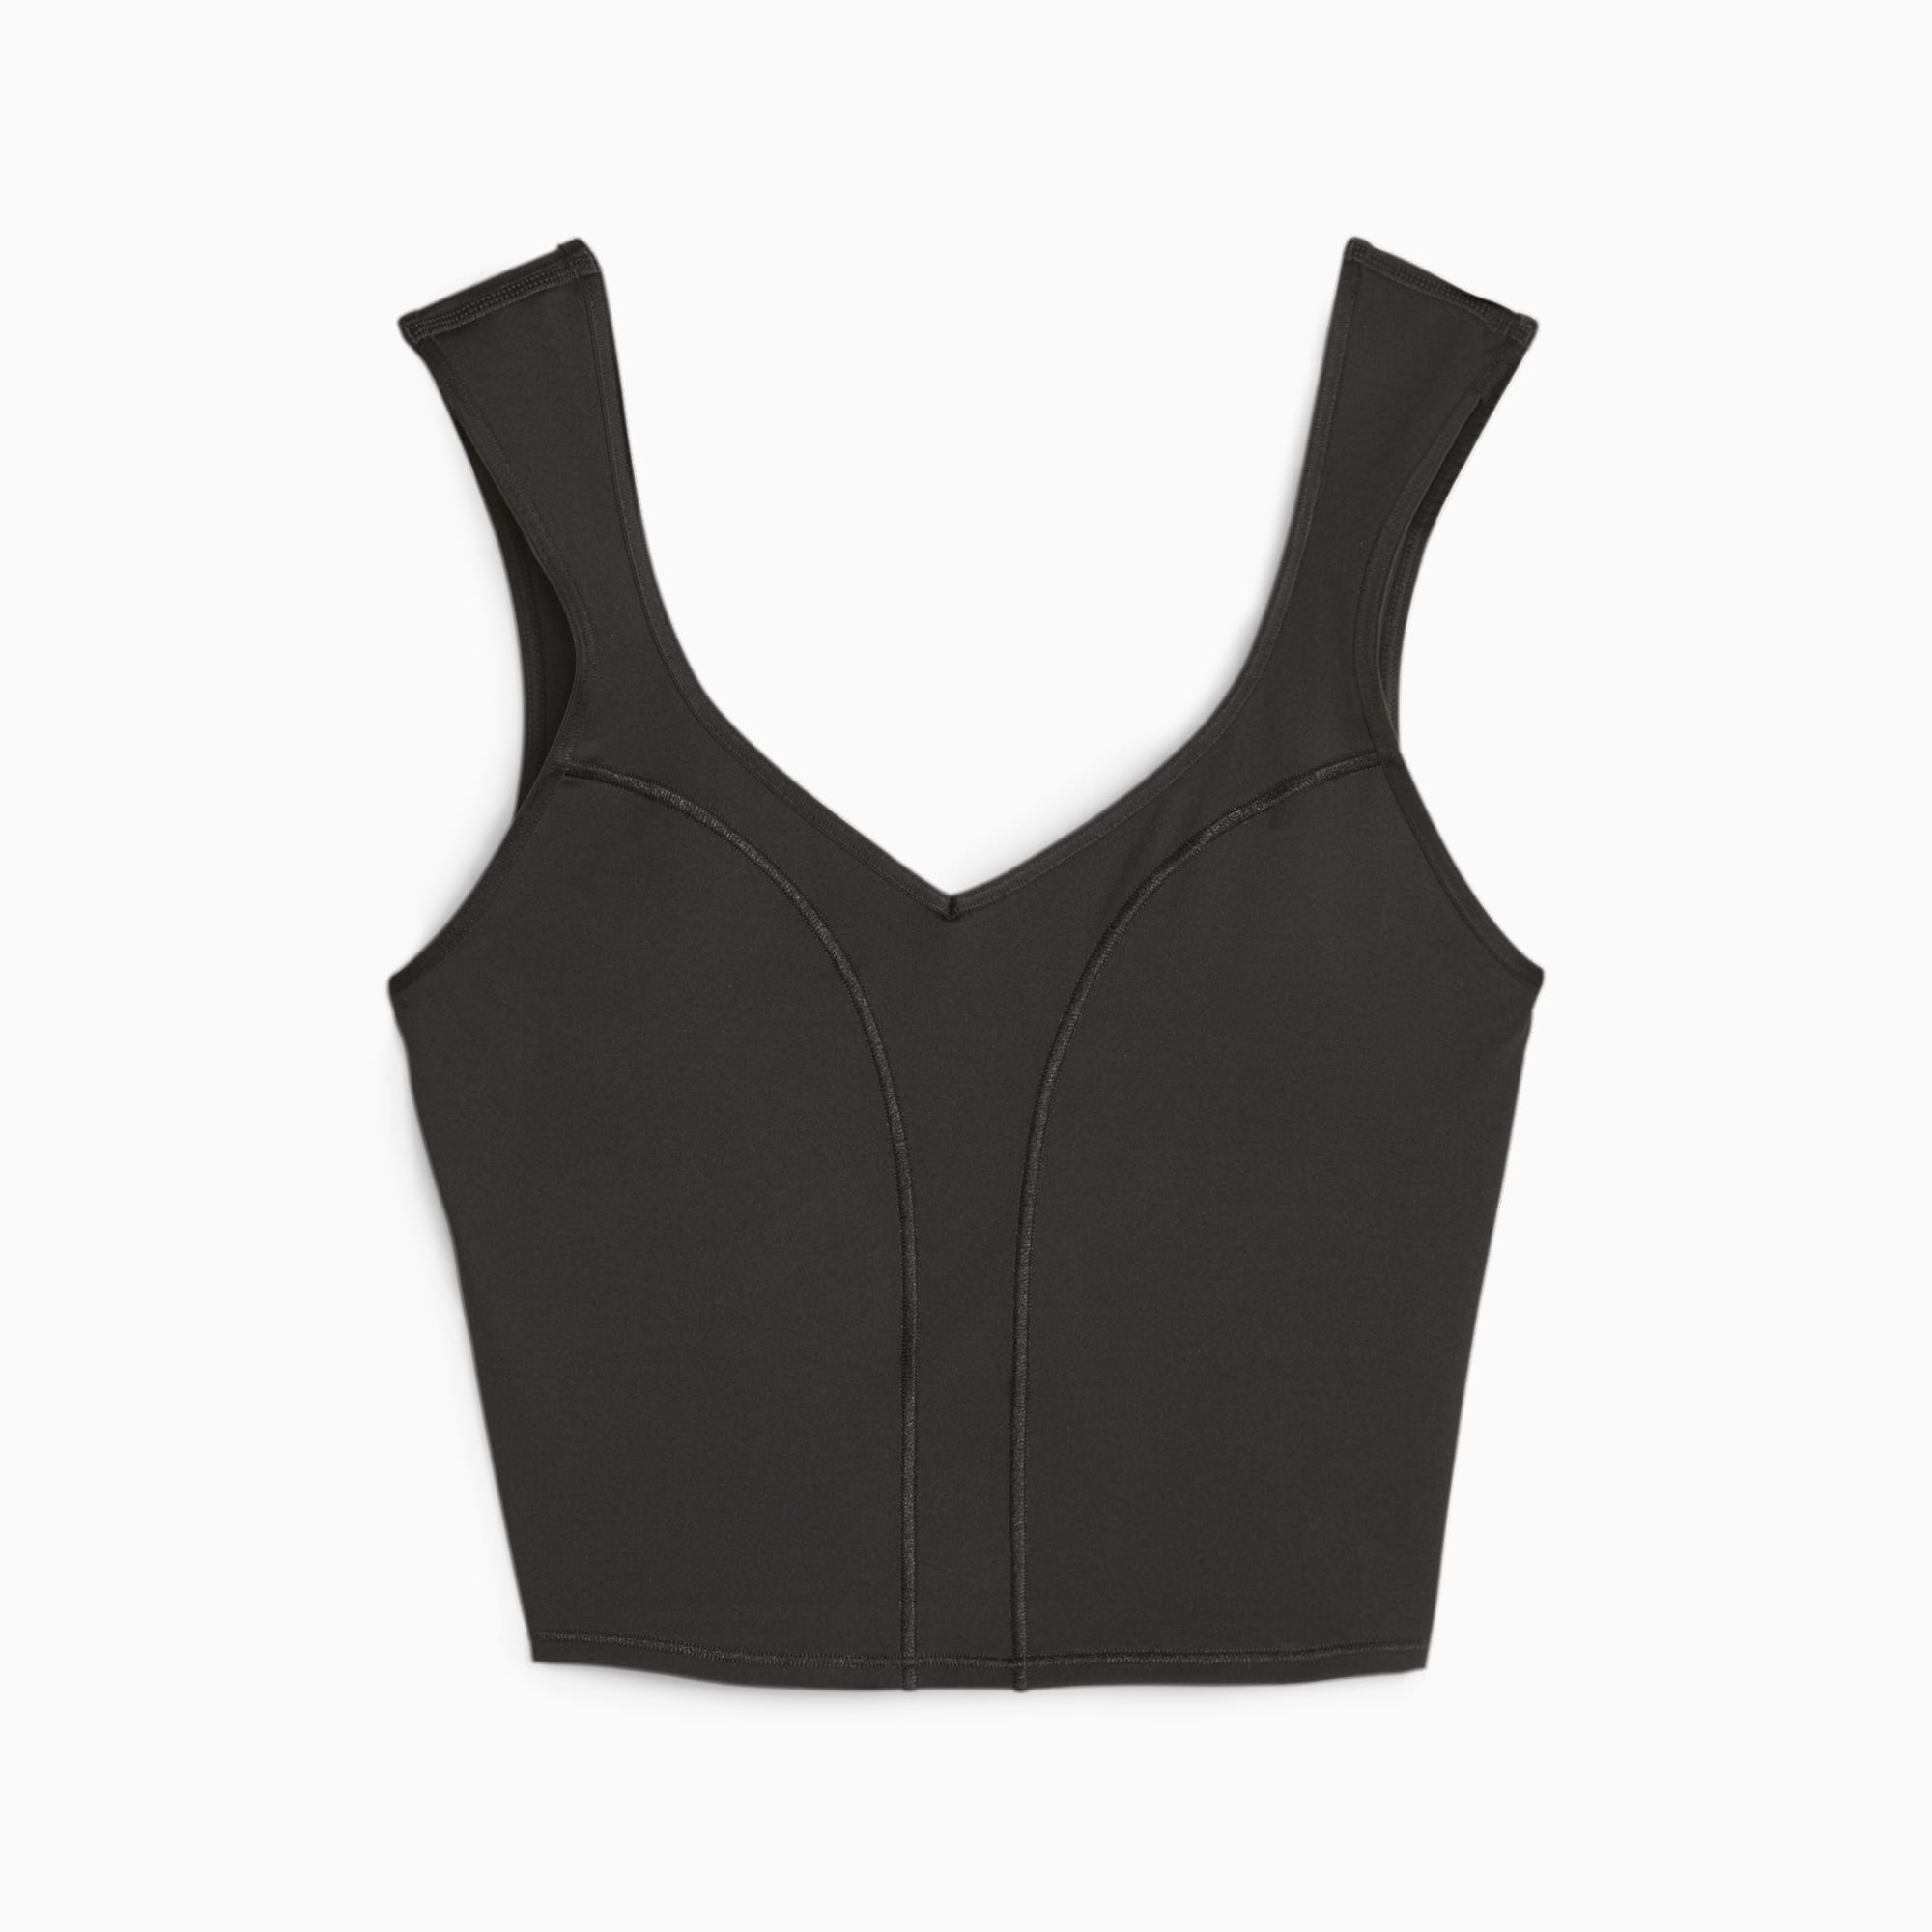 Puma Training Evoknit cropped seamless vest top in charcoal grey